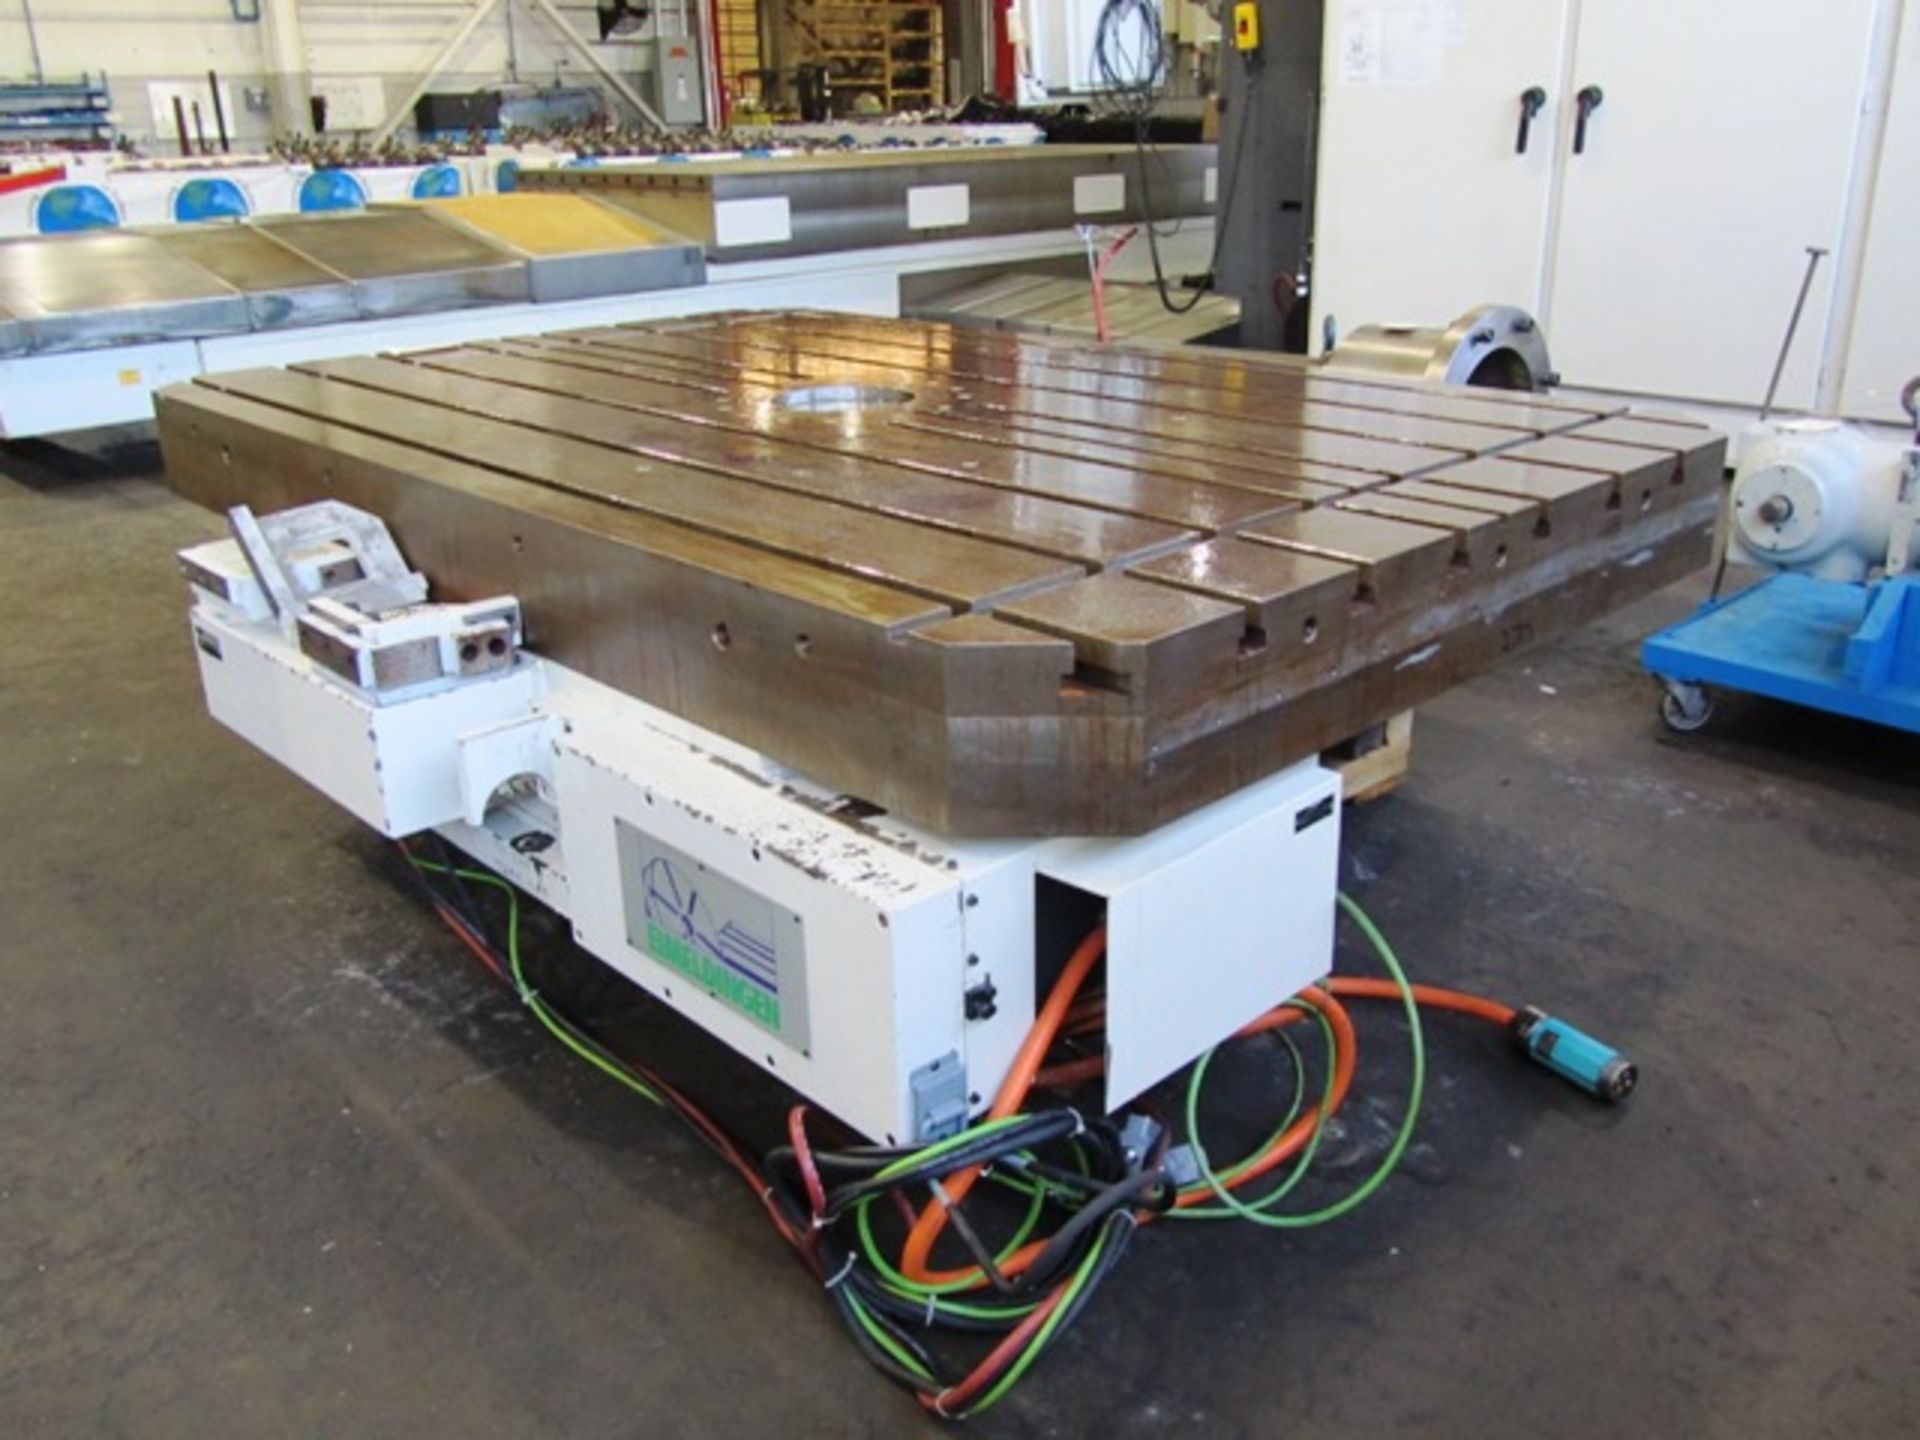 Eimeldingen Model 2-16-1600 63'' x 98" CNC B-Axis Rotary Table with +/- 3 Arc Seconds, 45,000lb